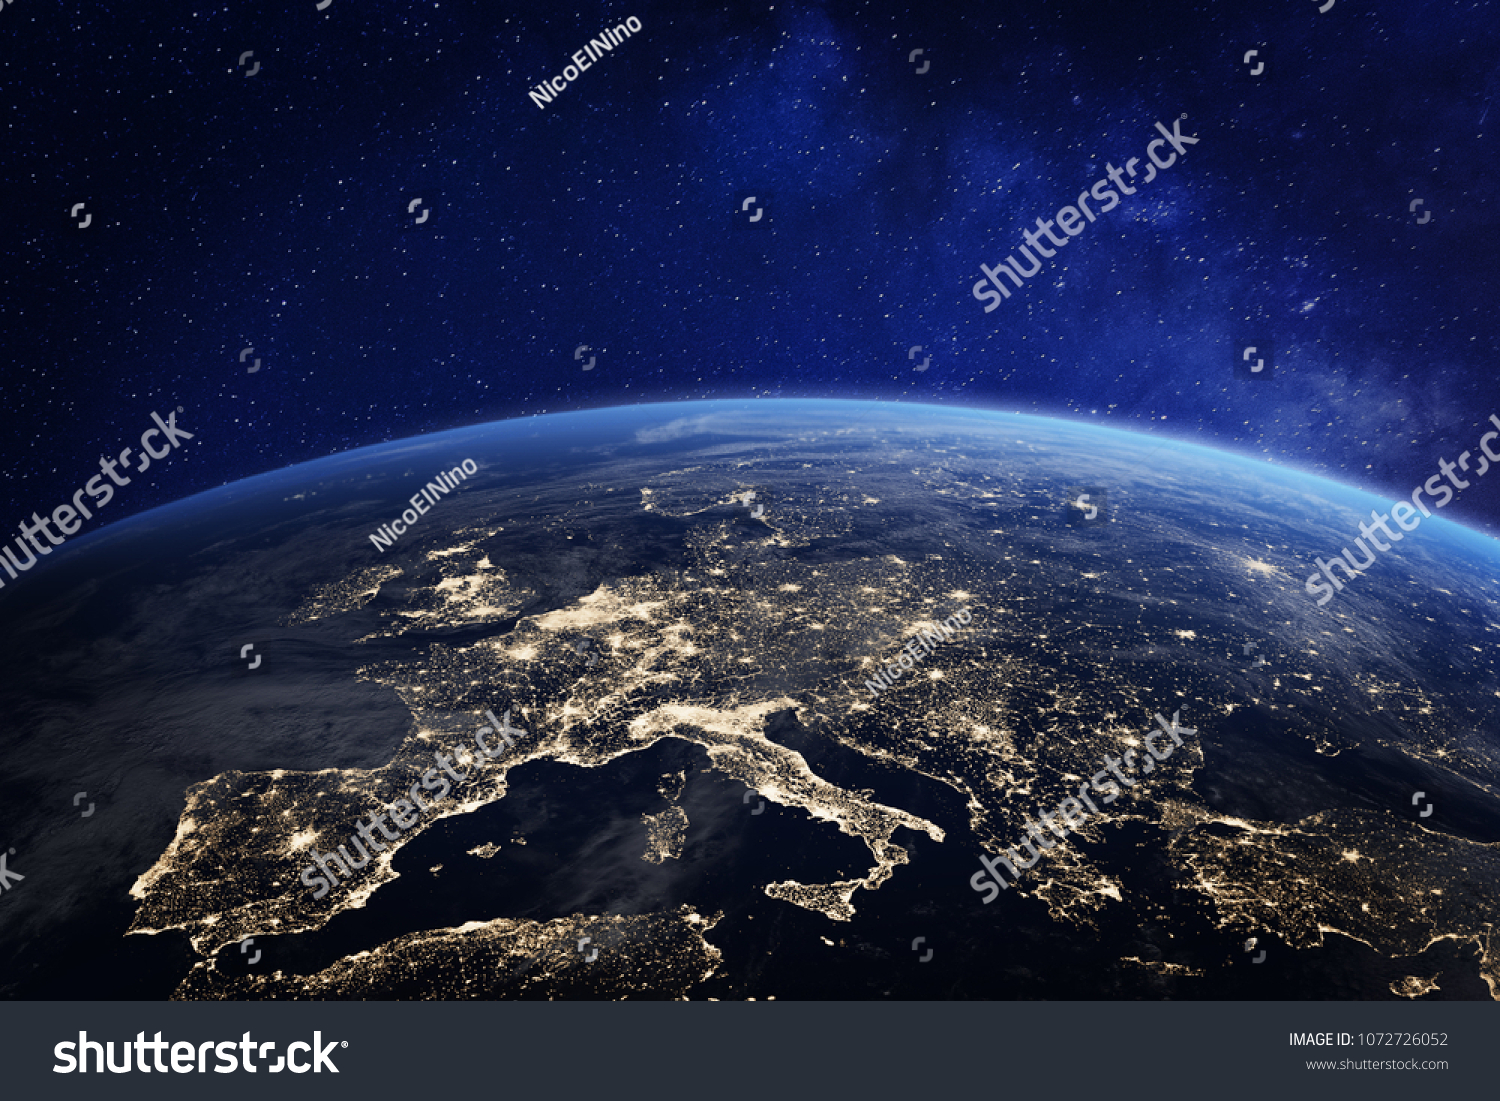 Europe at night viewed from space with city lights showing human activity in Germany, France, Spain, Italy and other countries, 3d rendering of planet Earth, elements from NASA #1072726052